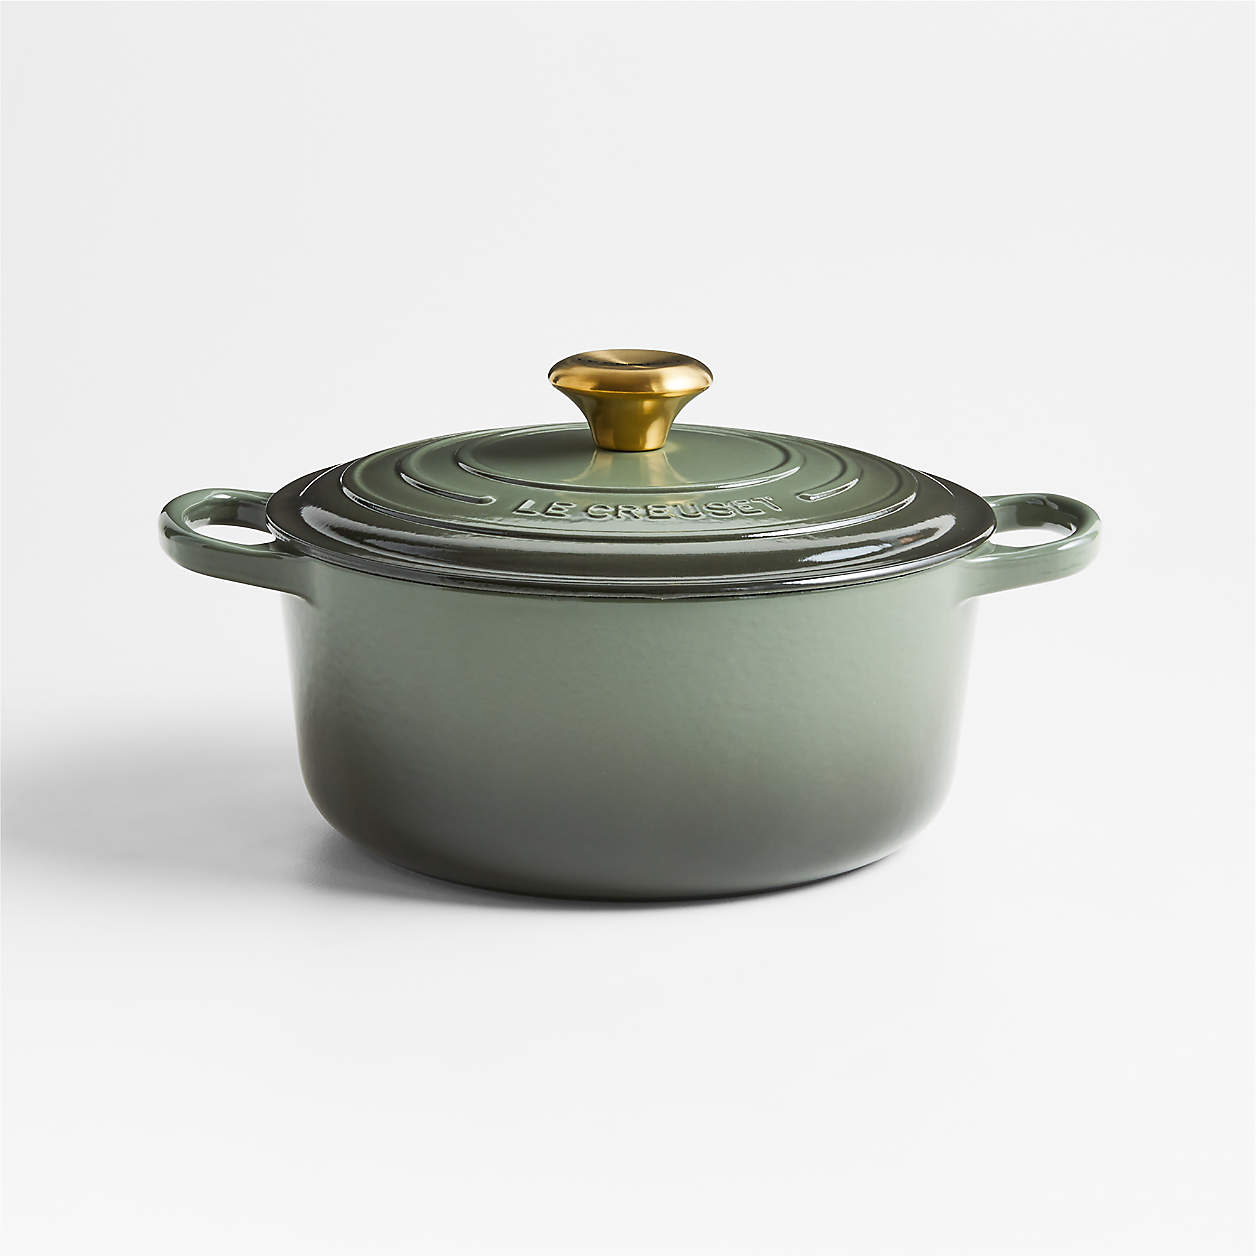 Le Creuset has just launched a stunning new collection